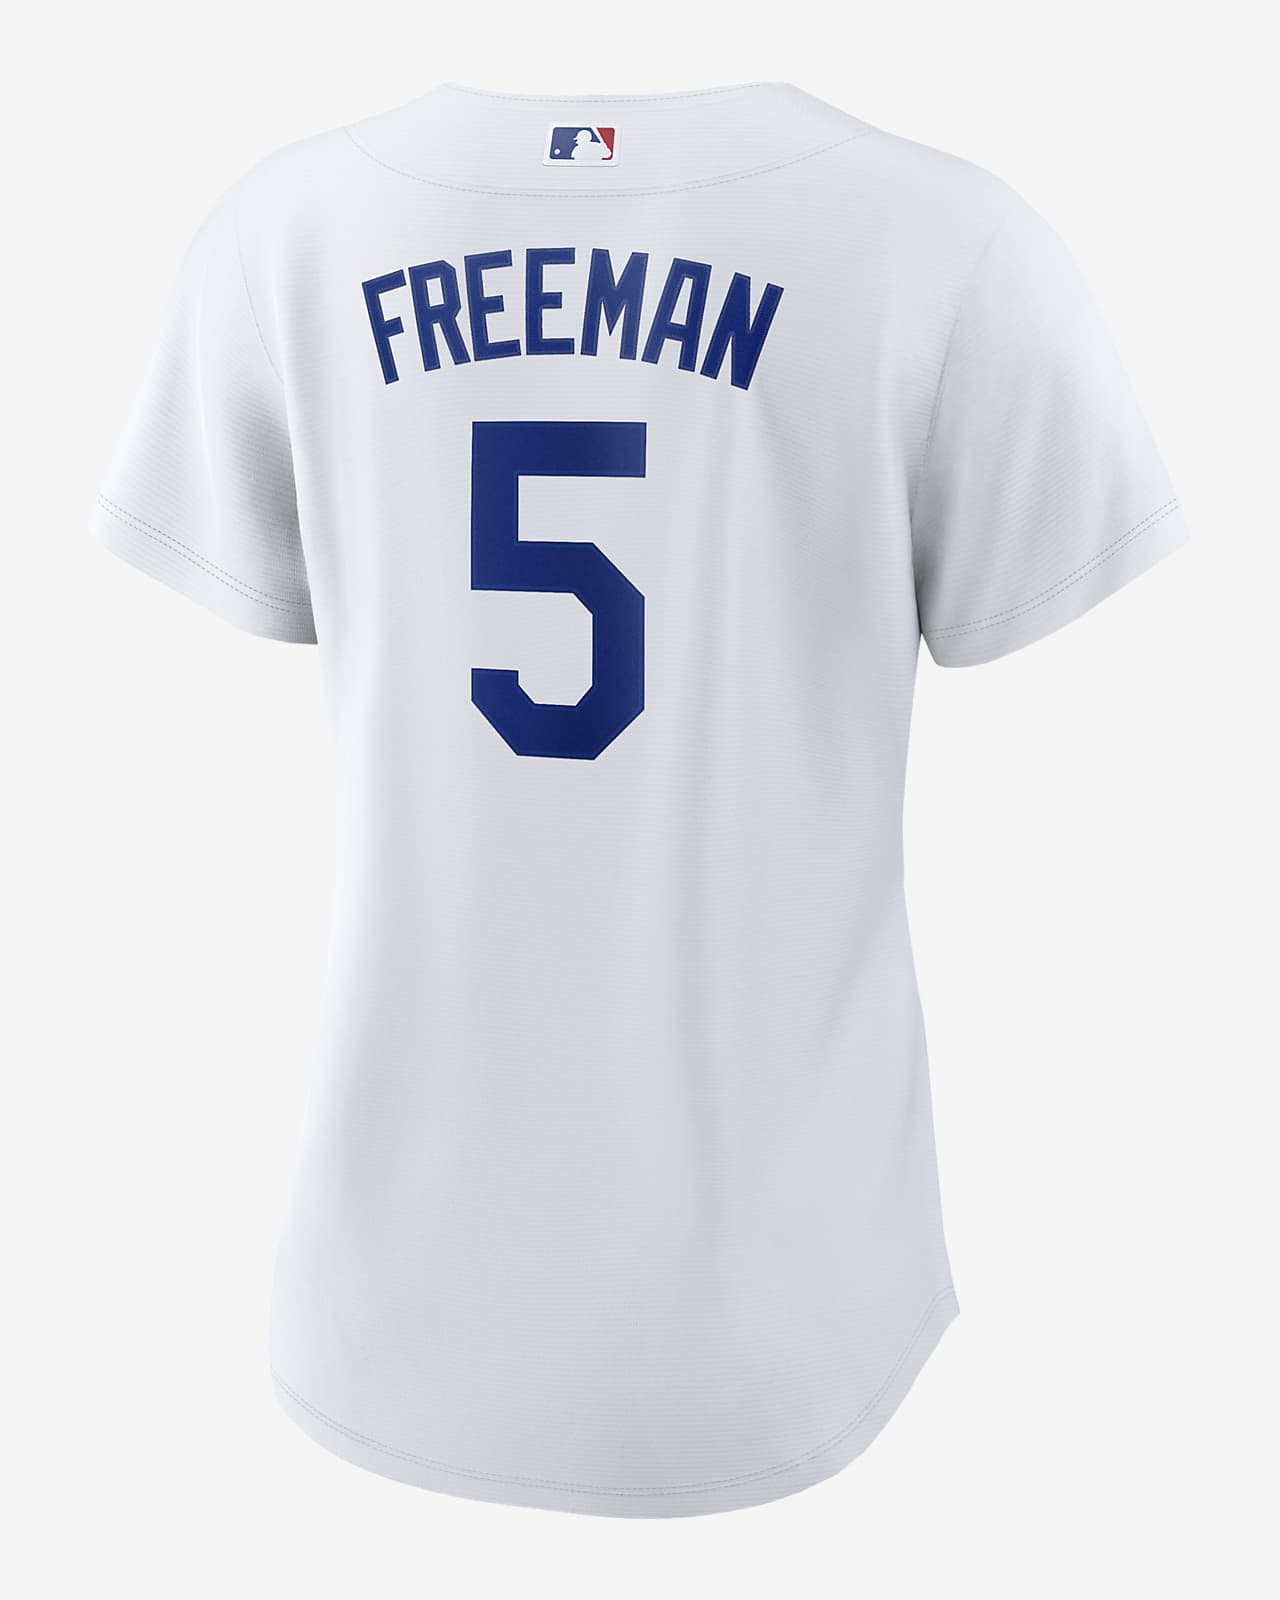 white and blue dodgers jersey